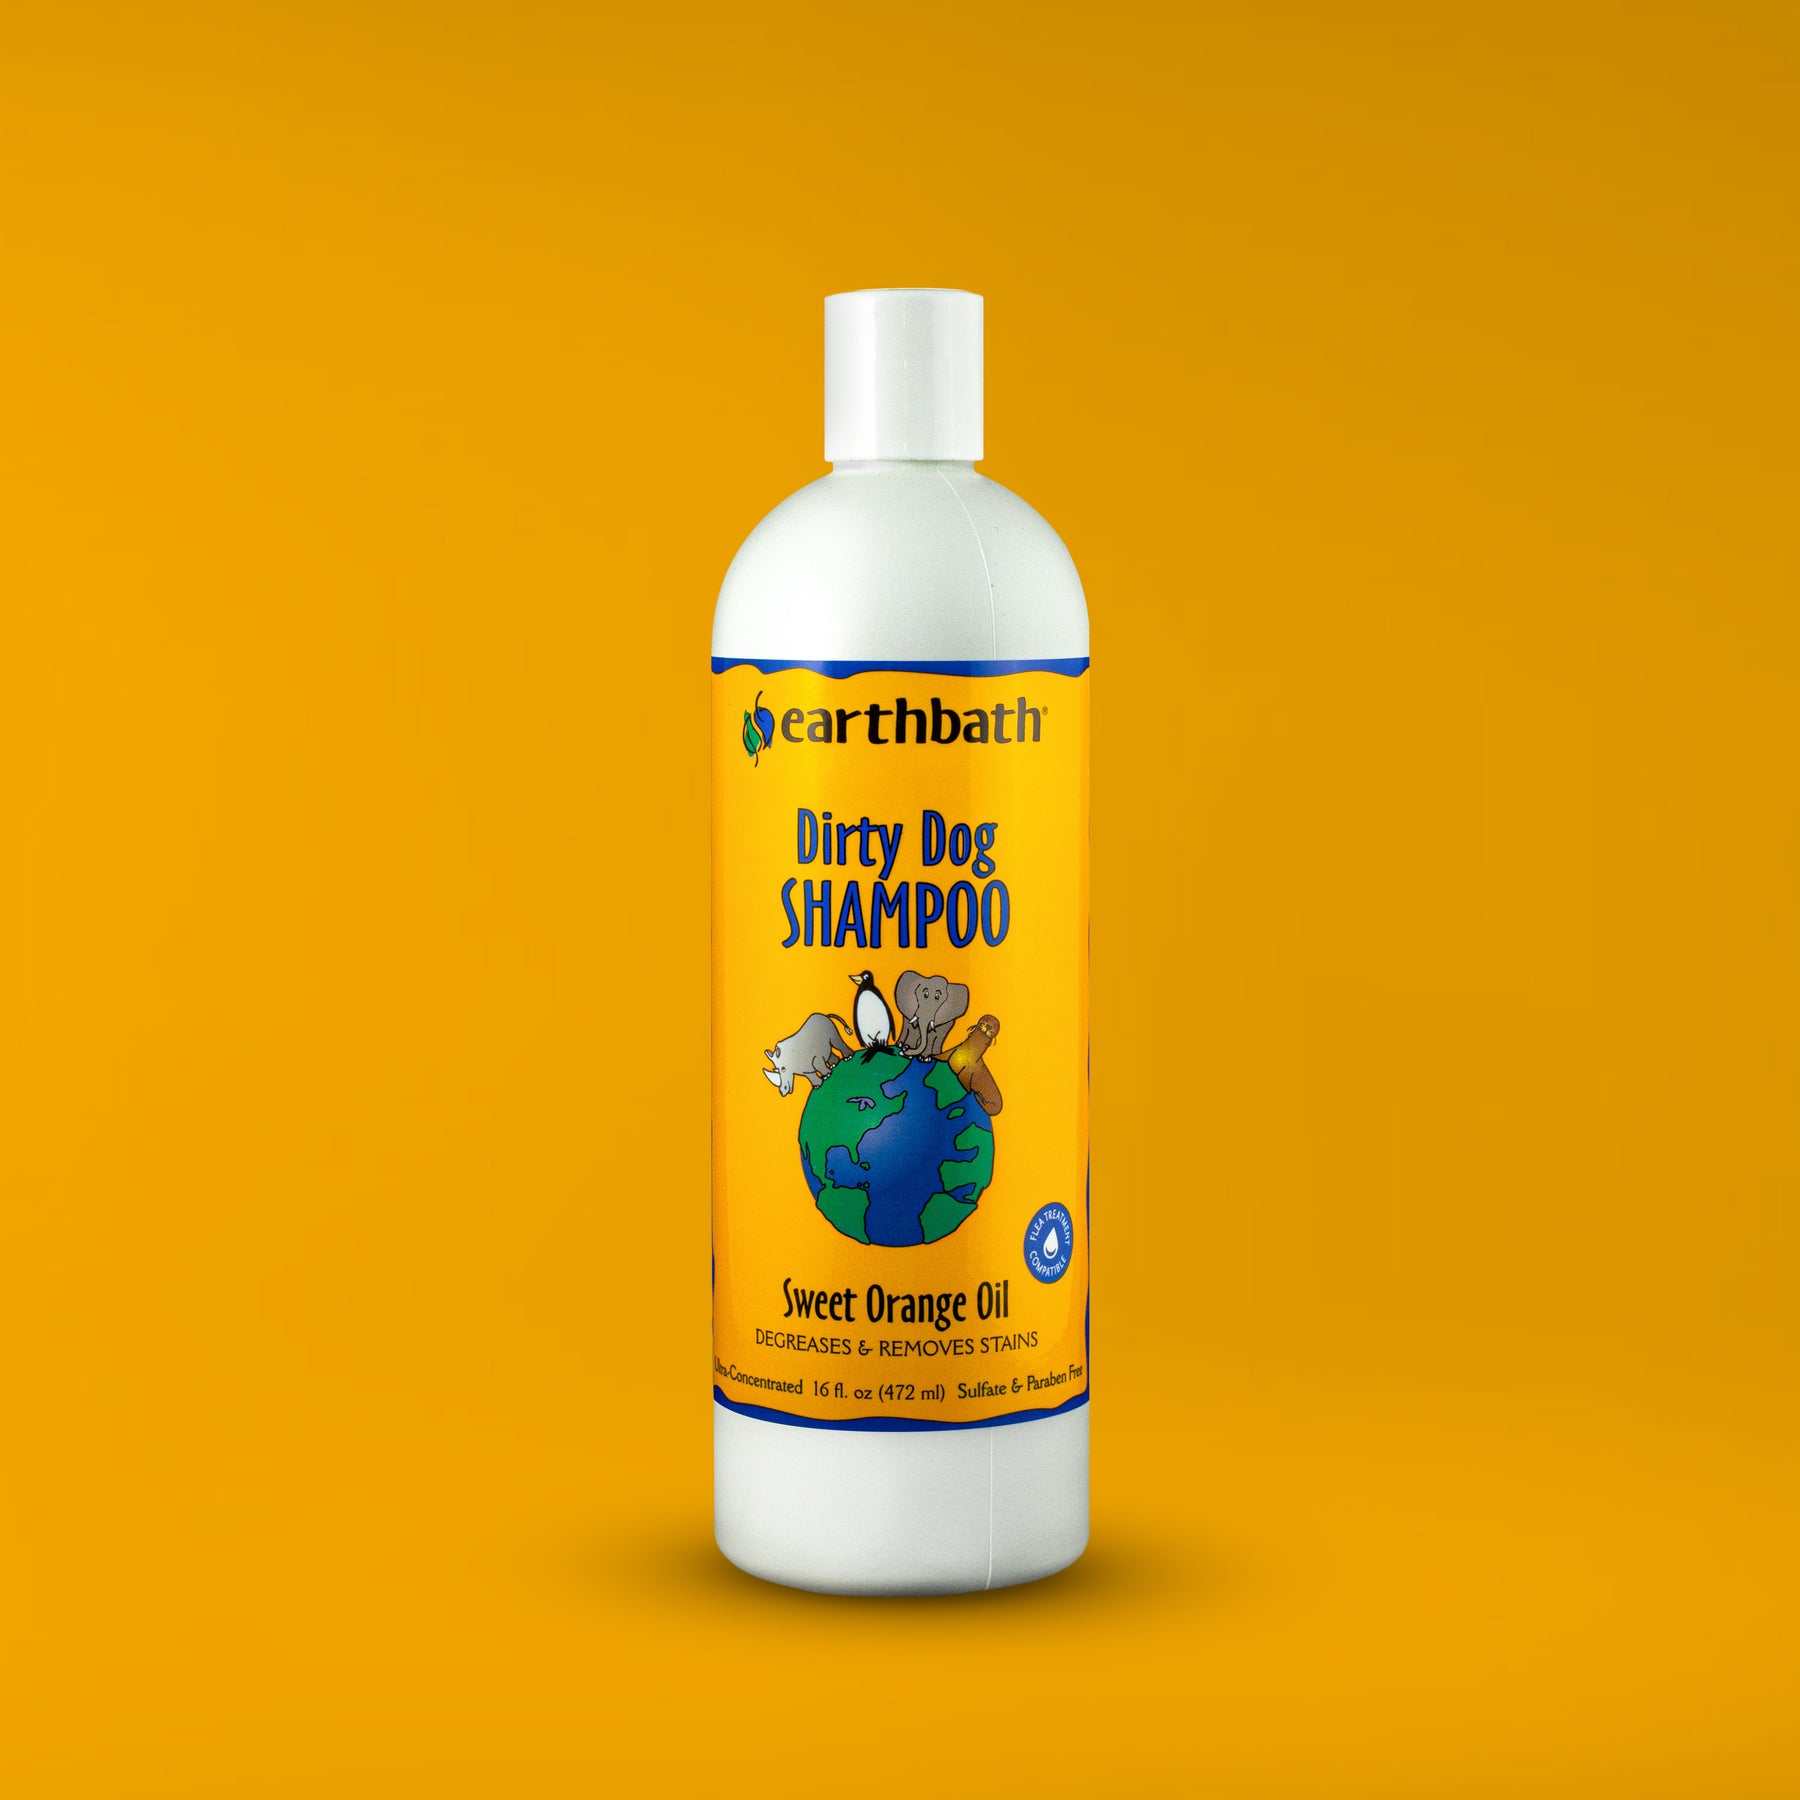 Dirty Dog Shampoo, Removes Stains | earthbath®